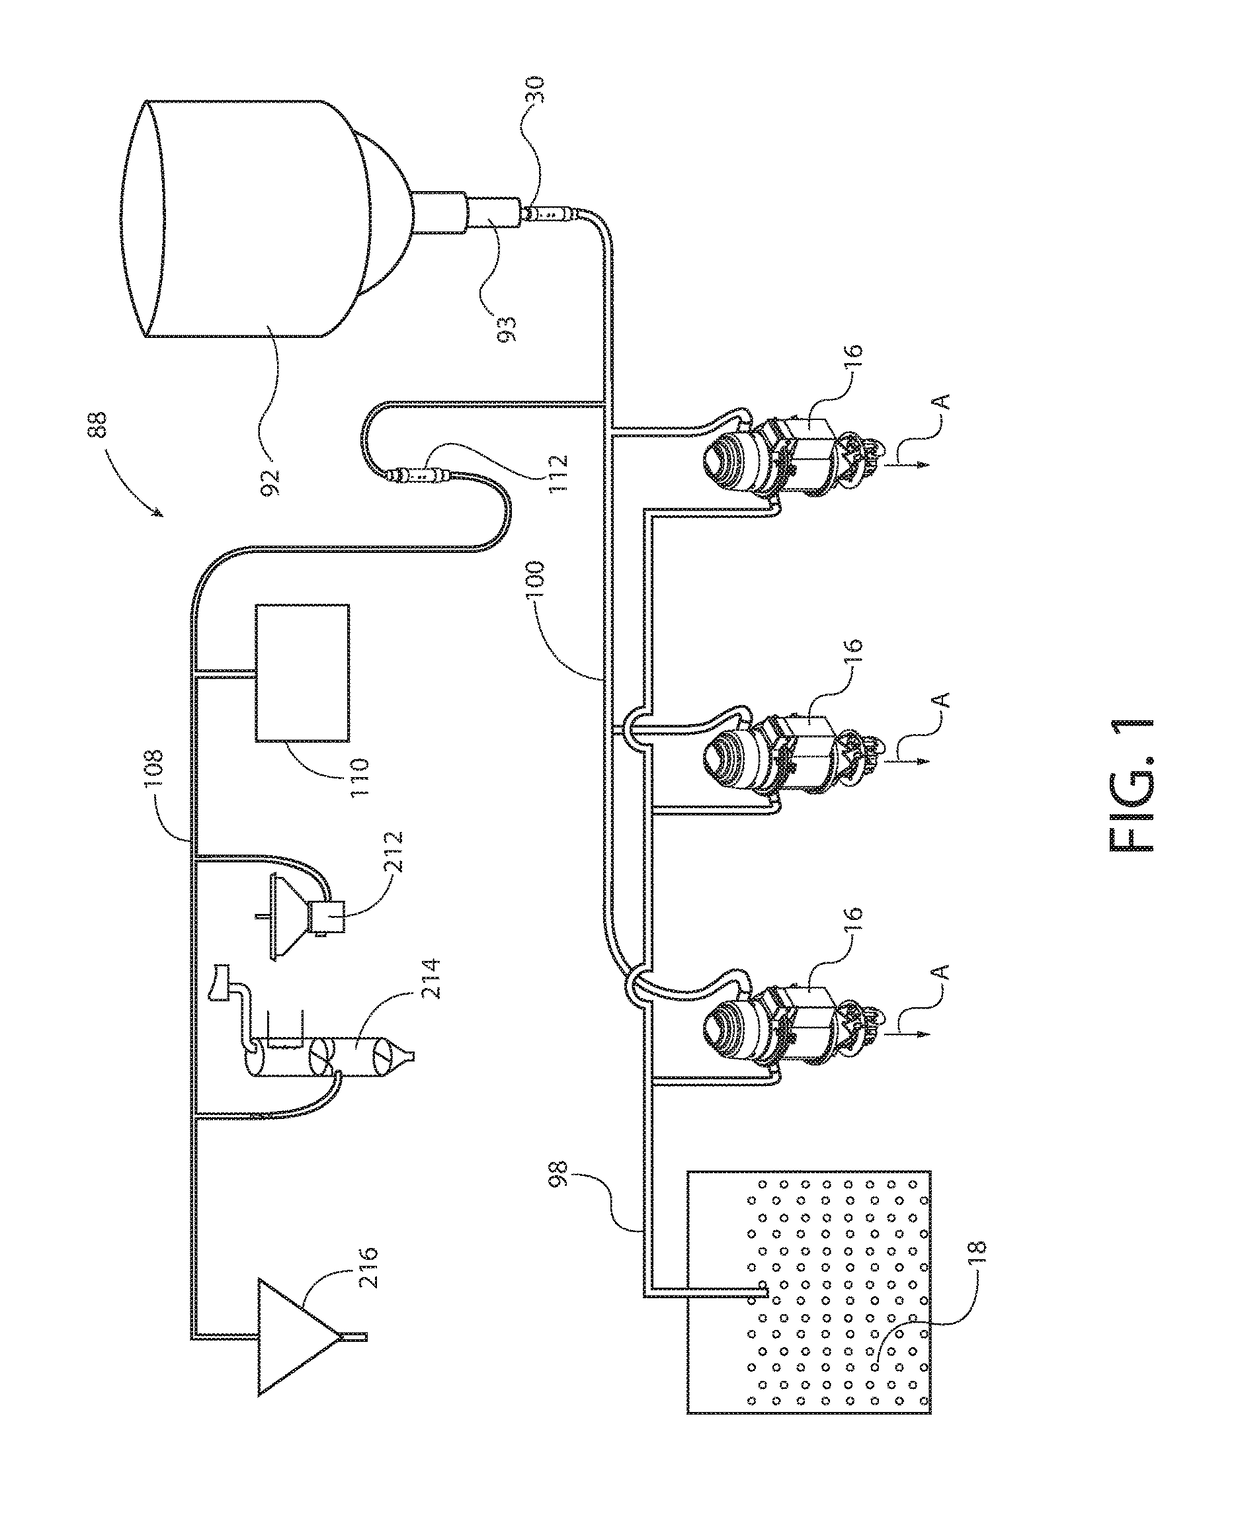 Resin delivery apparatus and method with plural air flow limiters